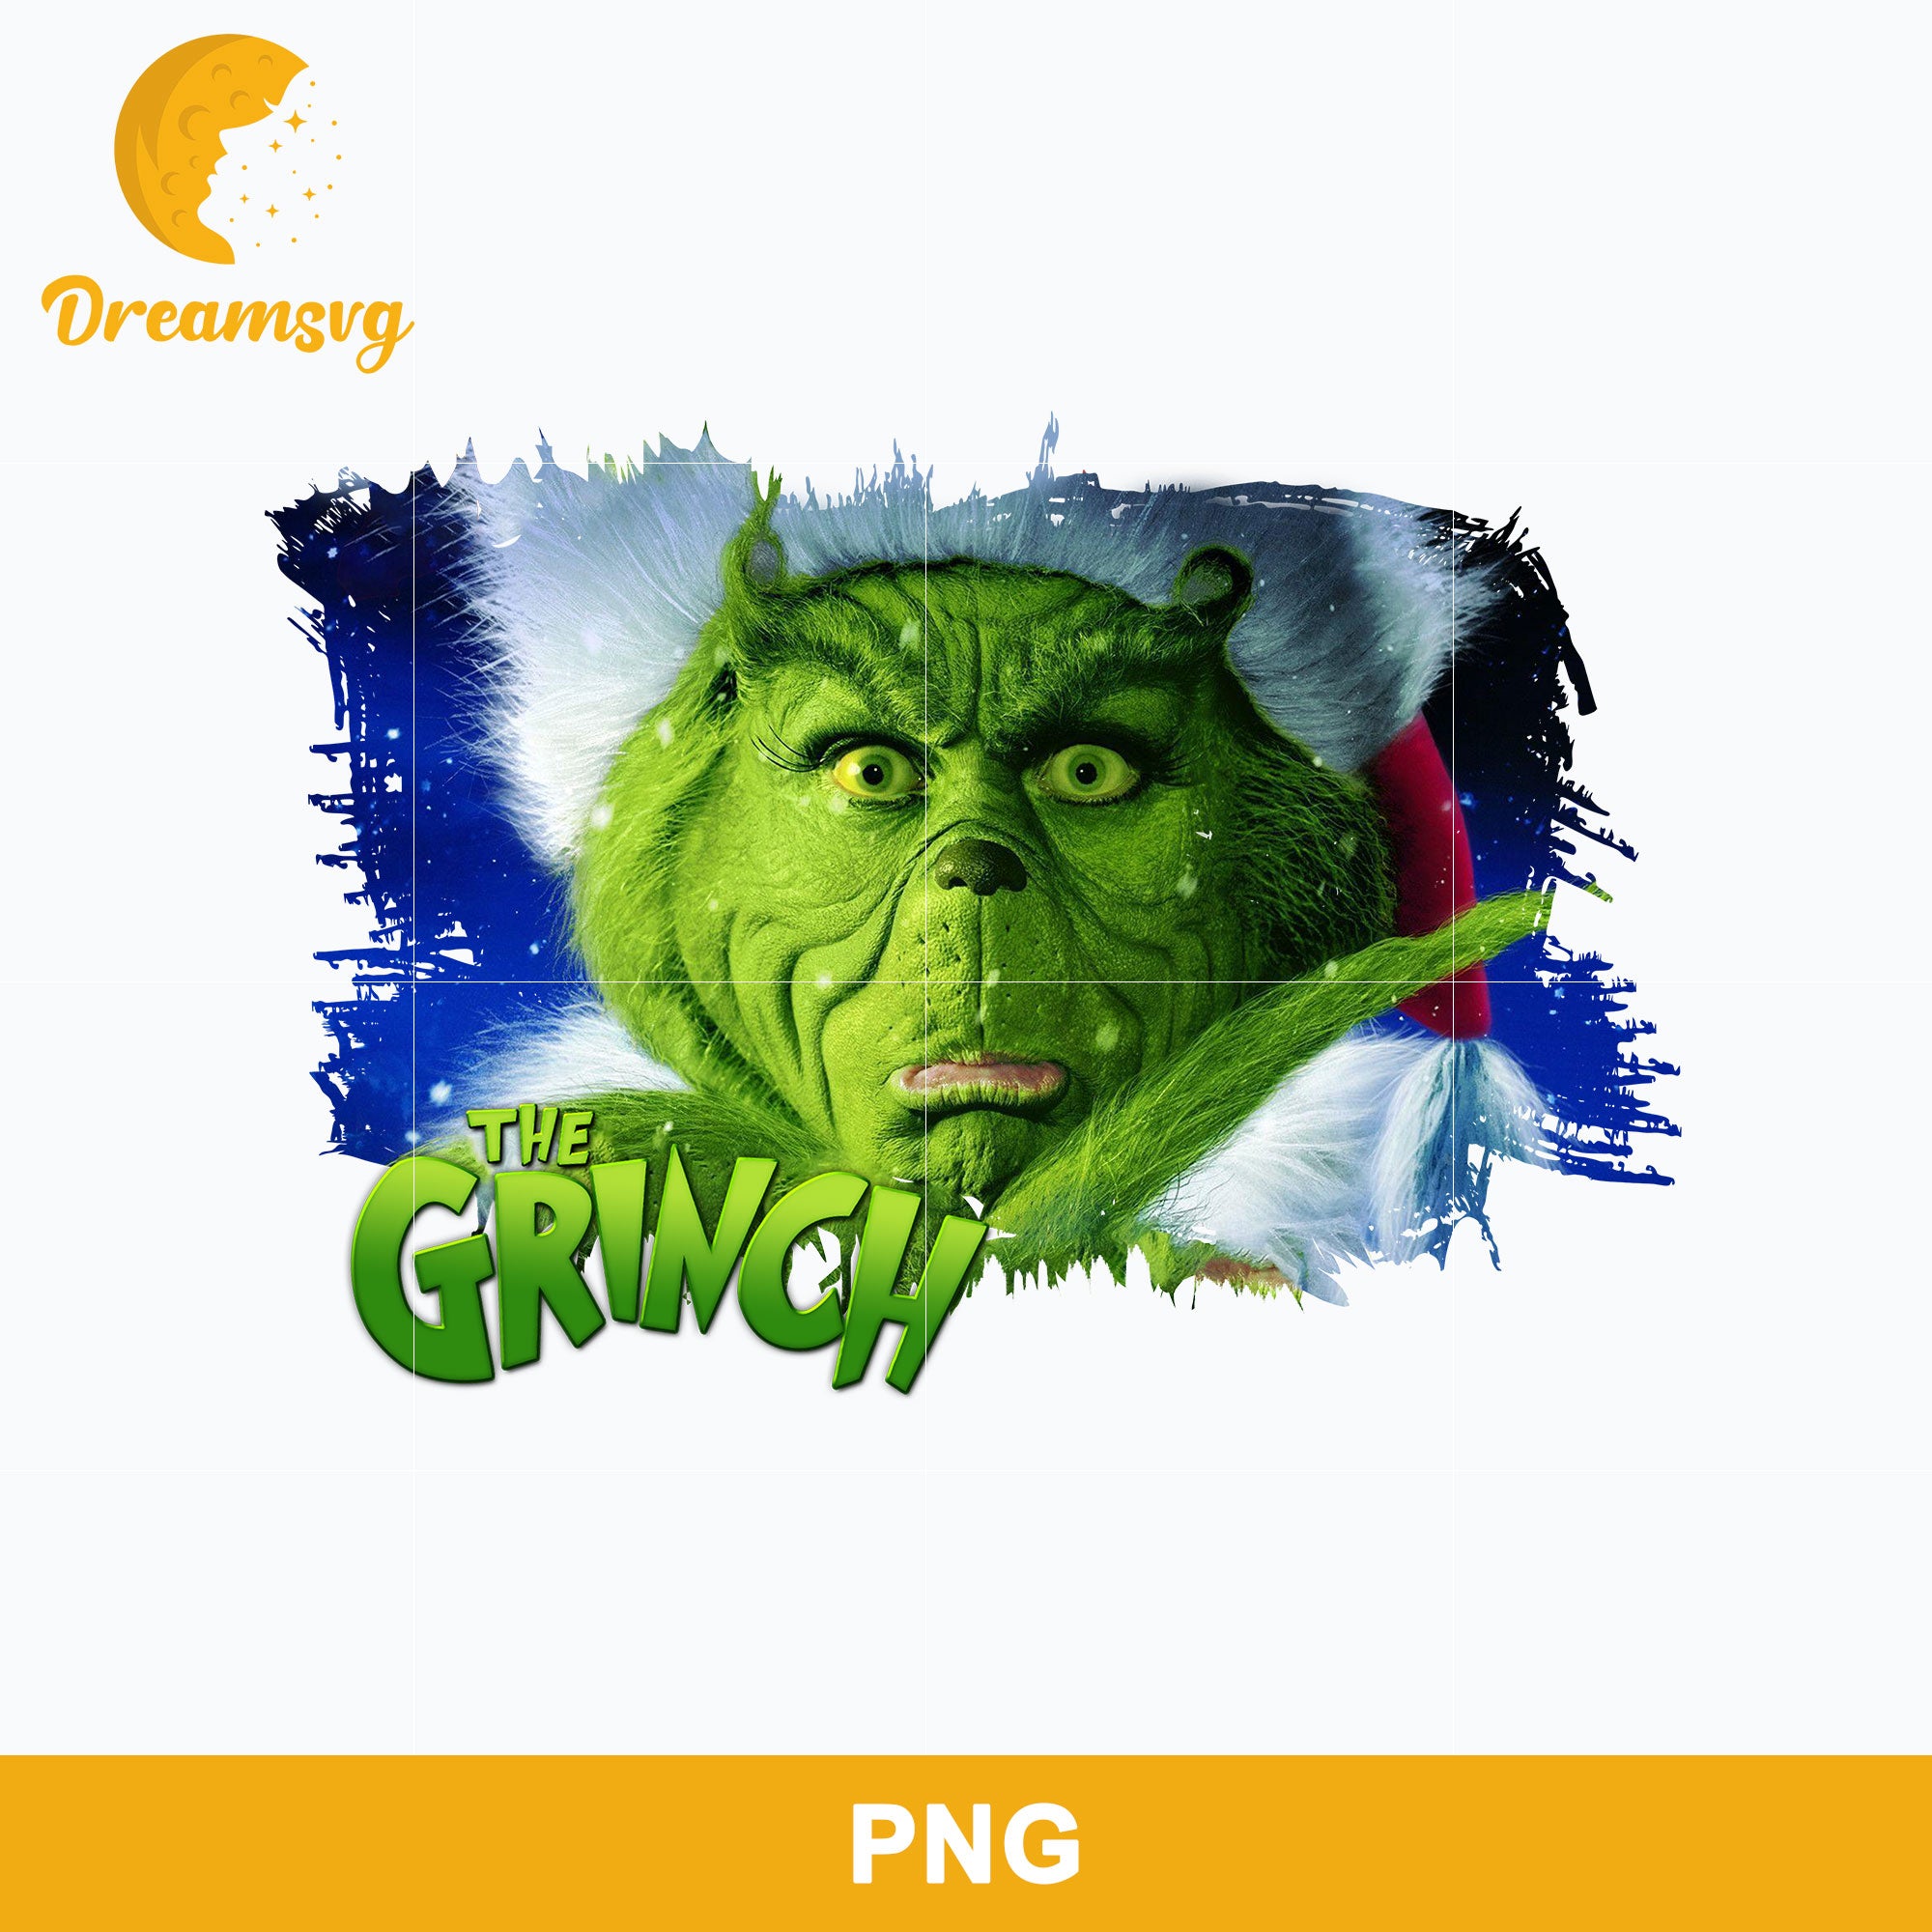 The Grinch PNG, Grinch Christmas PNG, Christmas PNG.